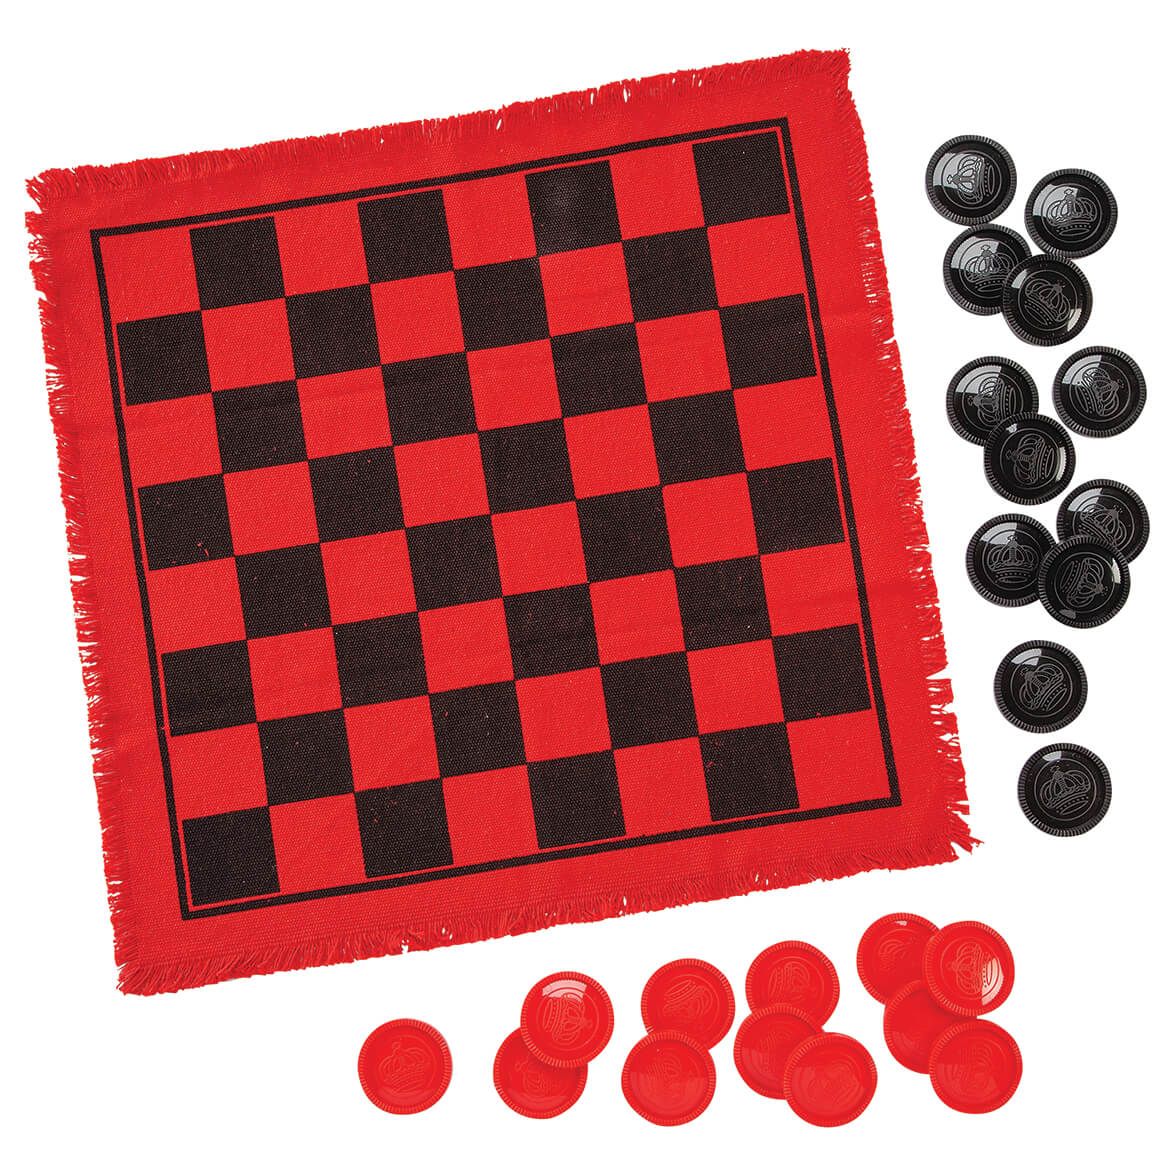 3-In-1 Giant Checkers and Tic Tac Toe Game Set + '-' + 375923